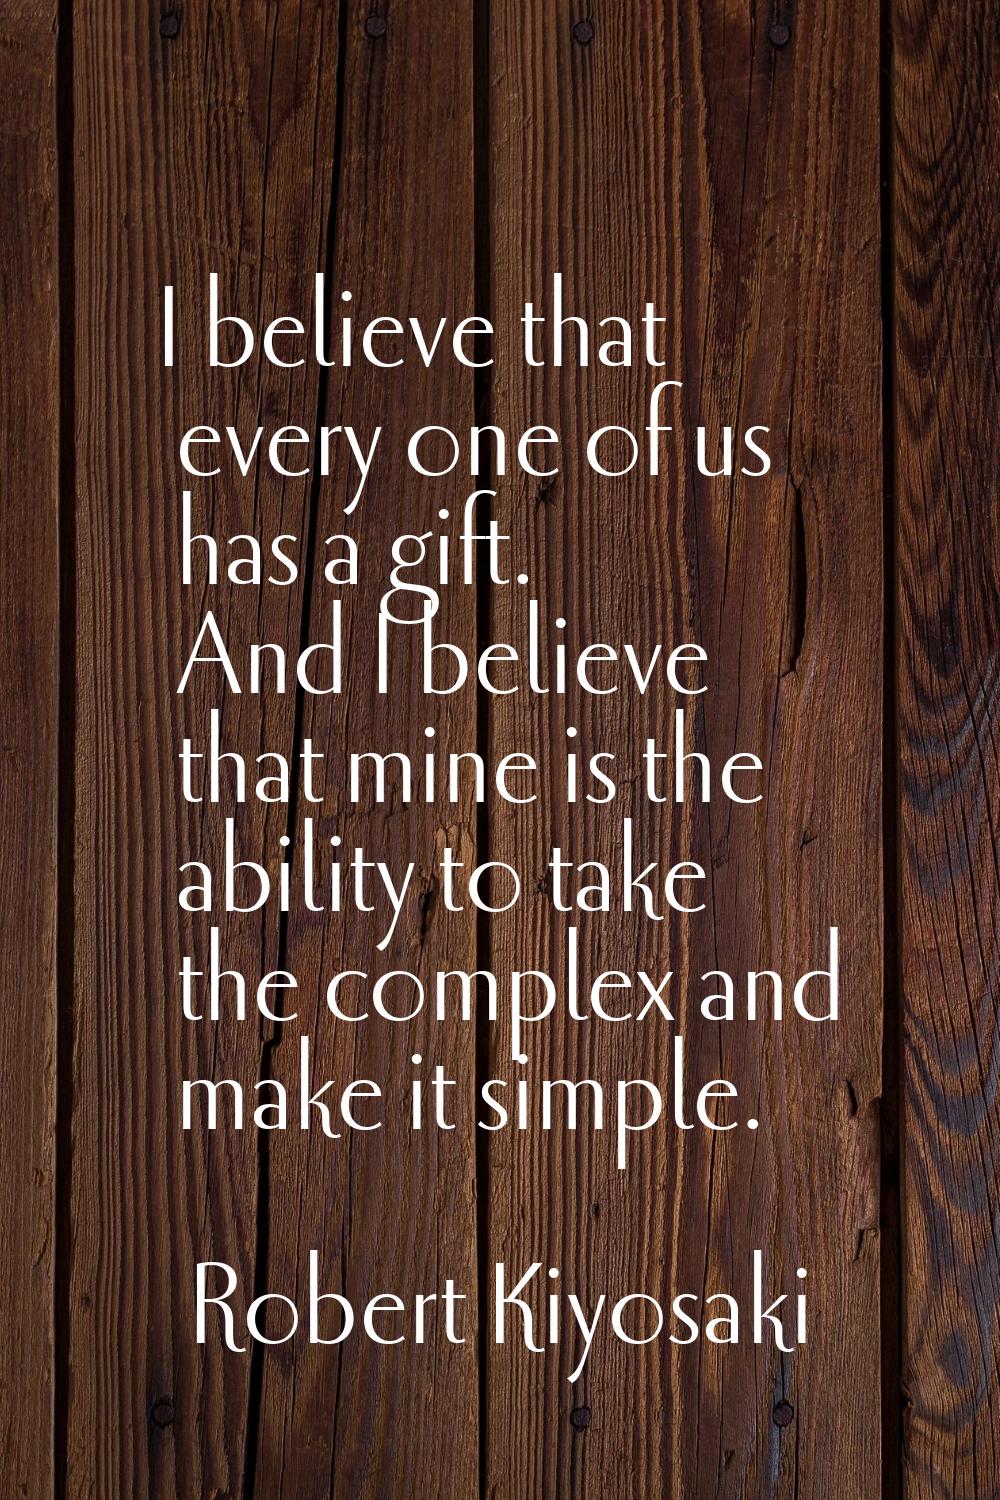 I believe that every one of us has a gift. And I believe that mine is the ability to take the compl